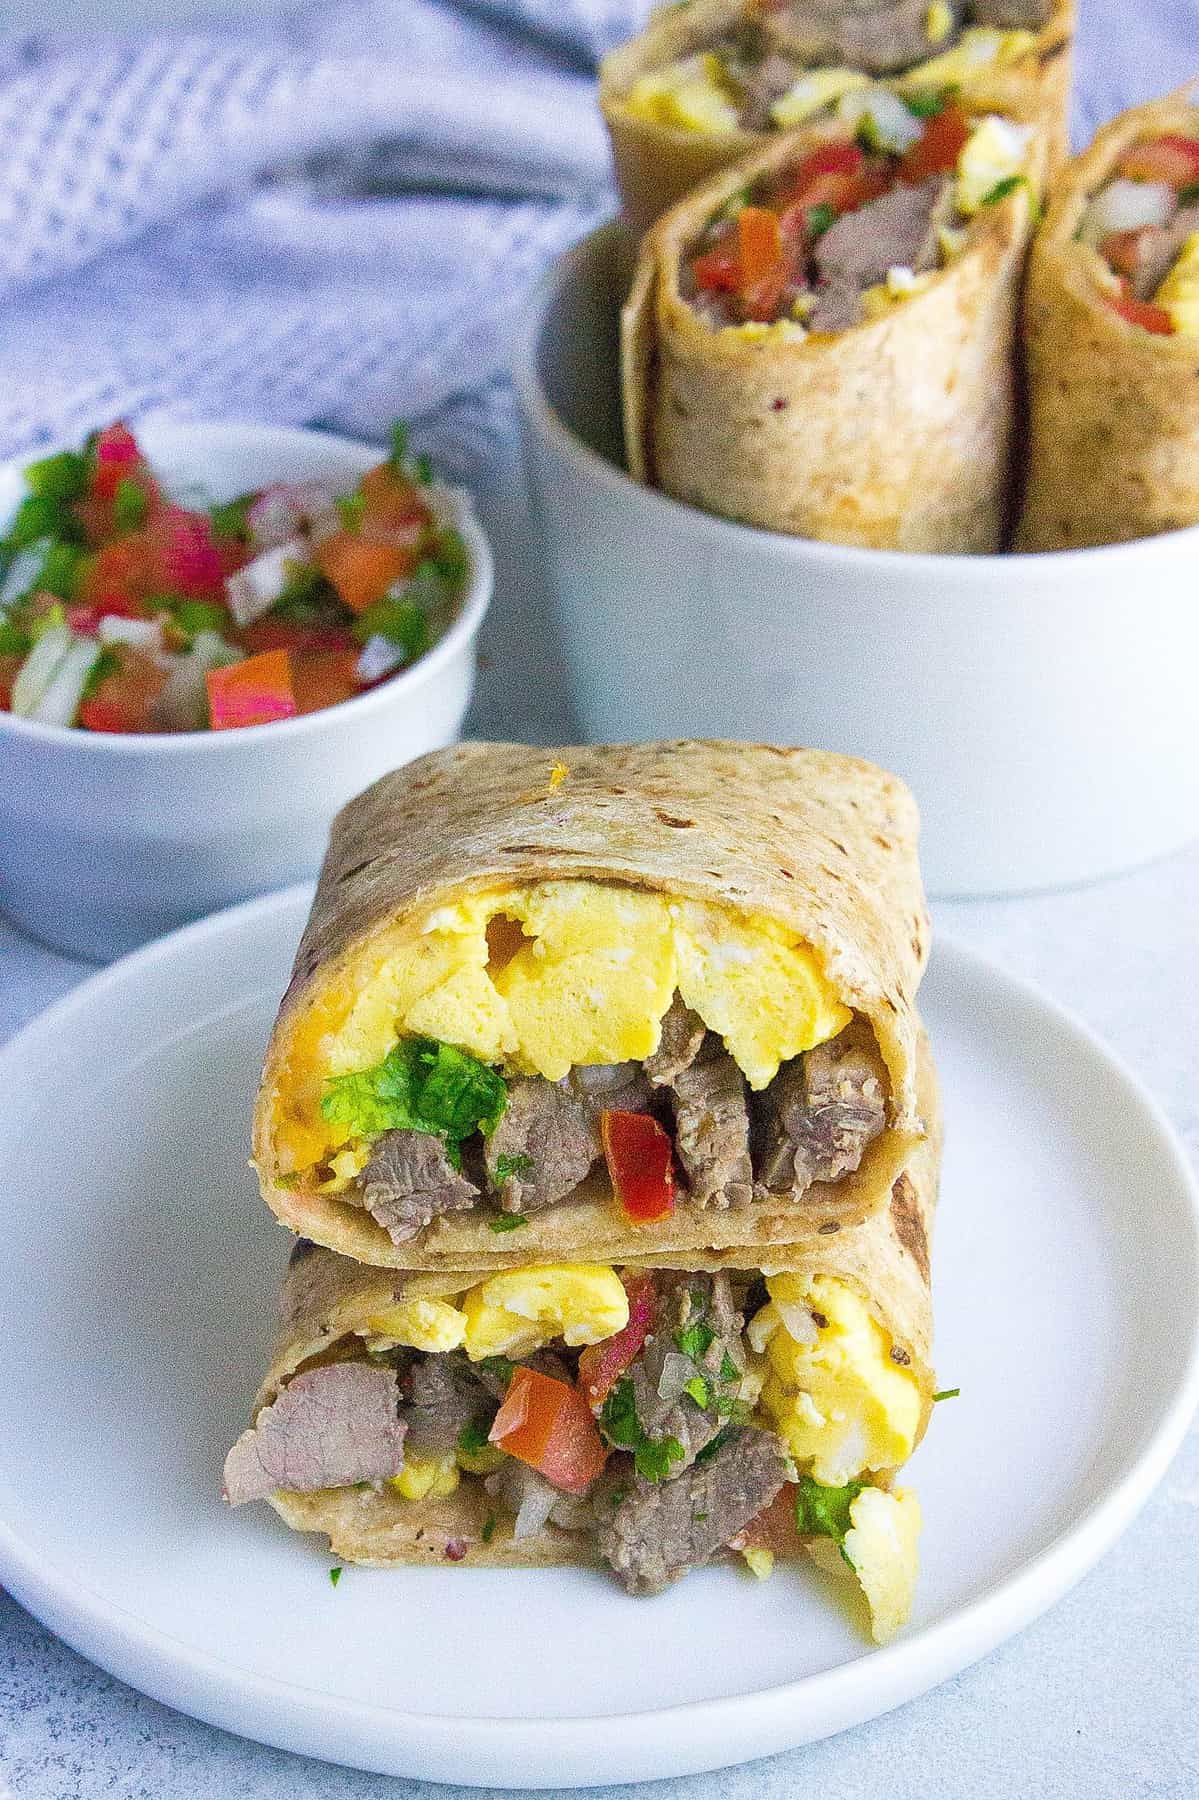 Satisfy Your Cravings with Our Steak and Egg Burritos